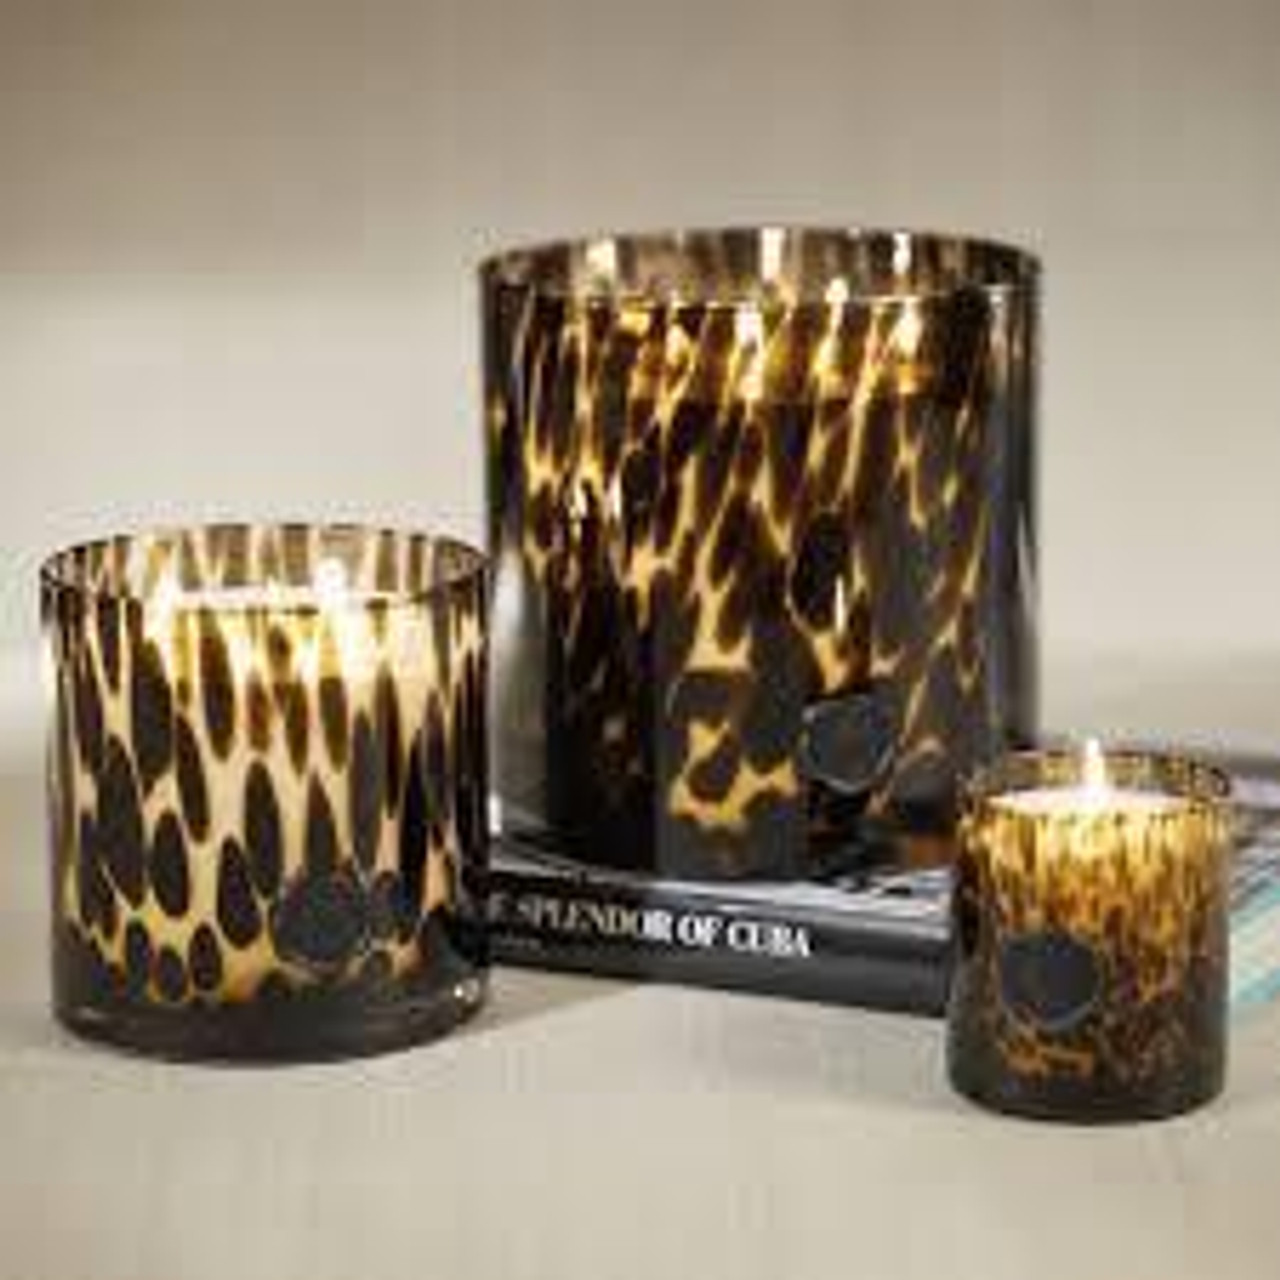 Large glass candle holders with 5 wicks